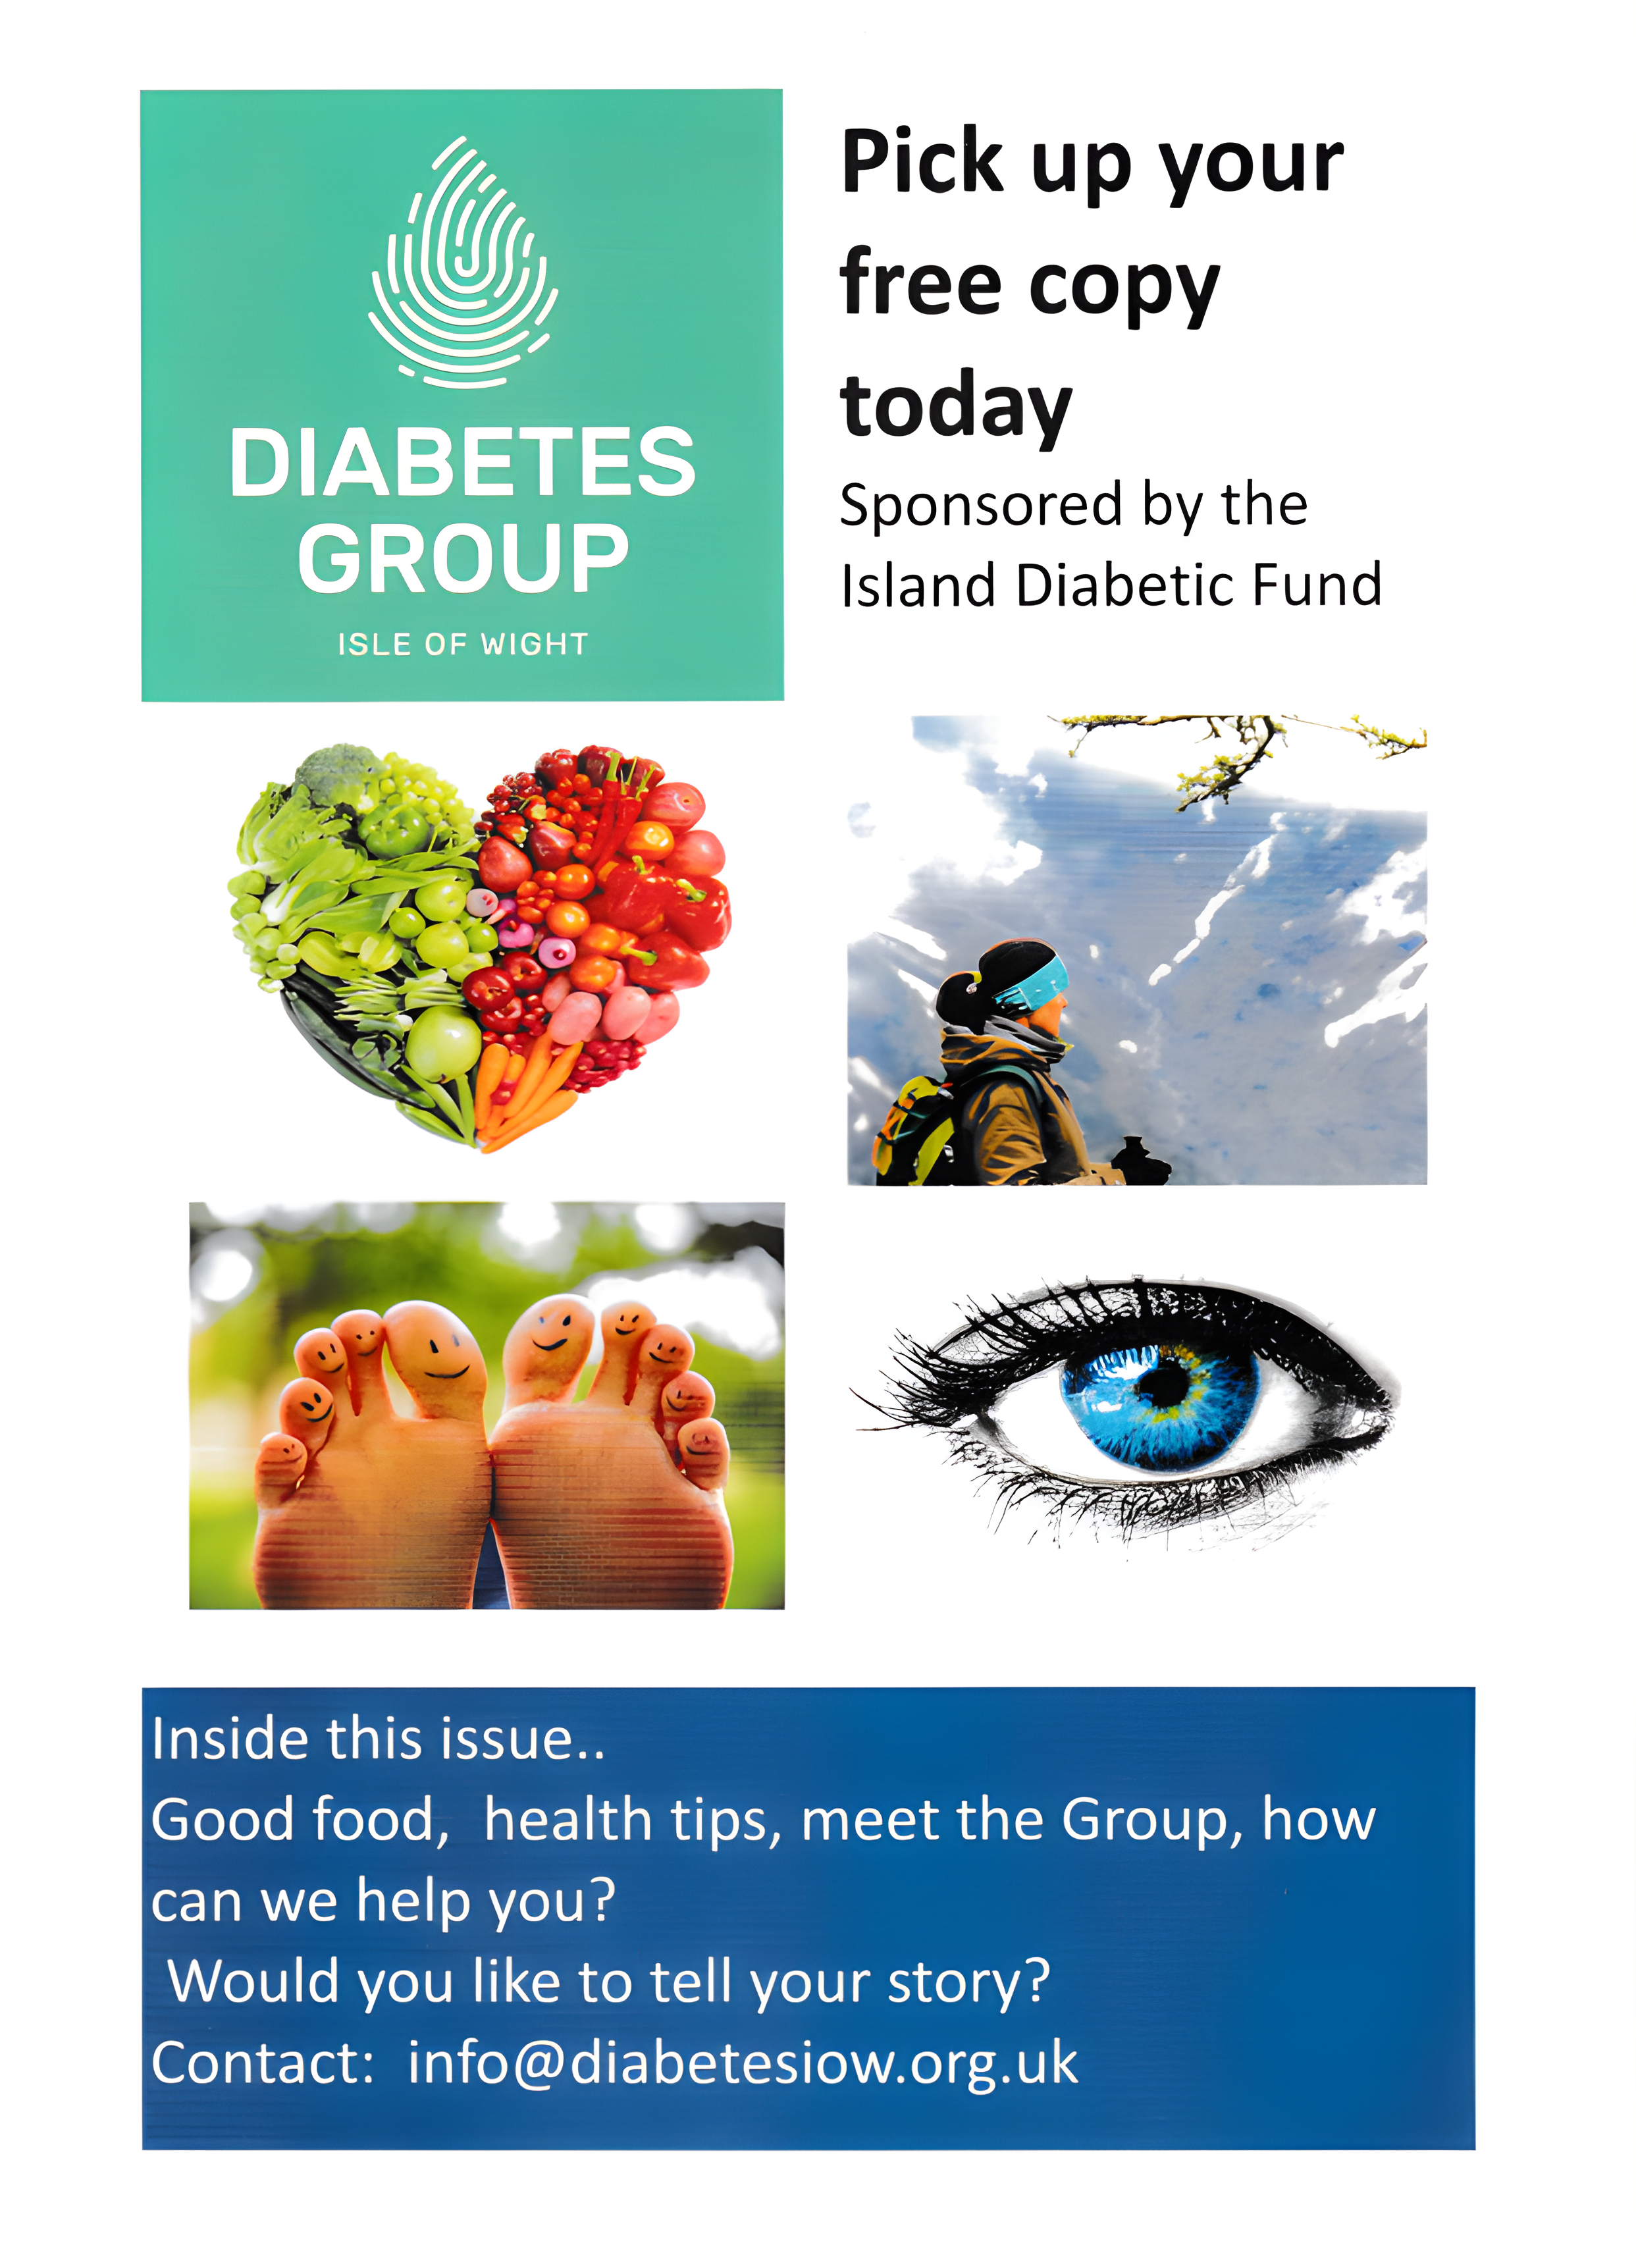 Diabetes Magazine Issue 1 – read our first magazine